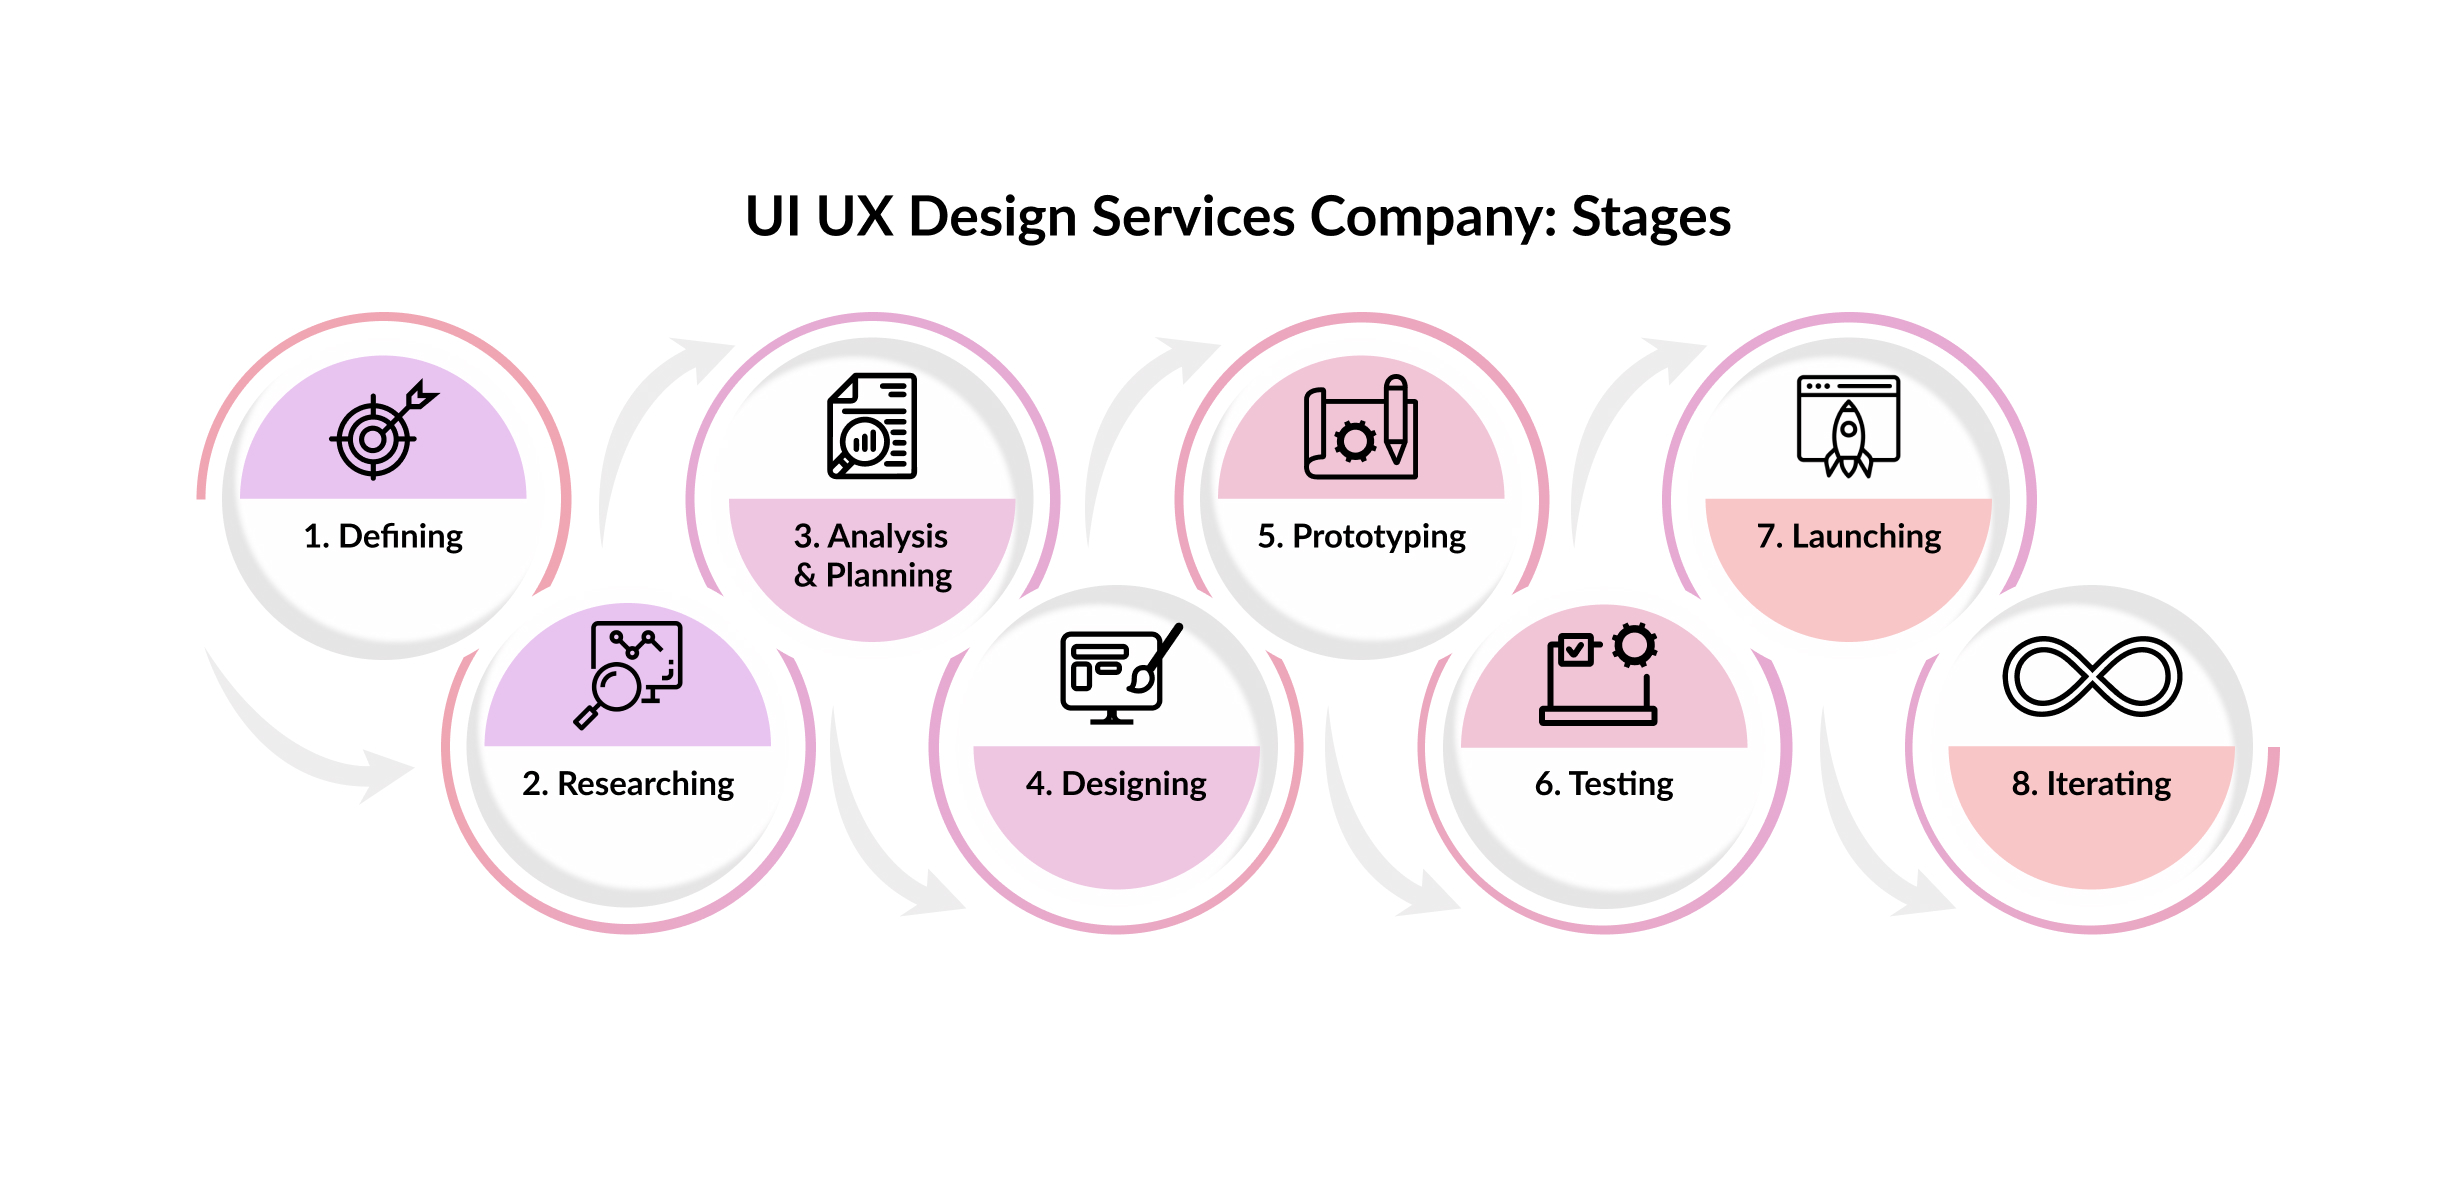 UI UX Design Services Company: Stages